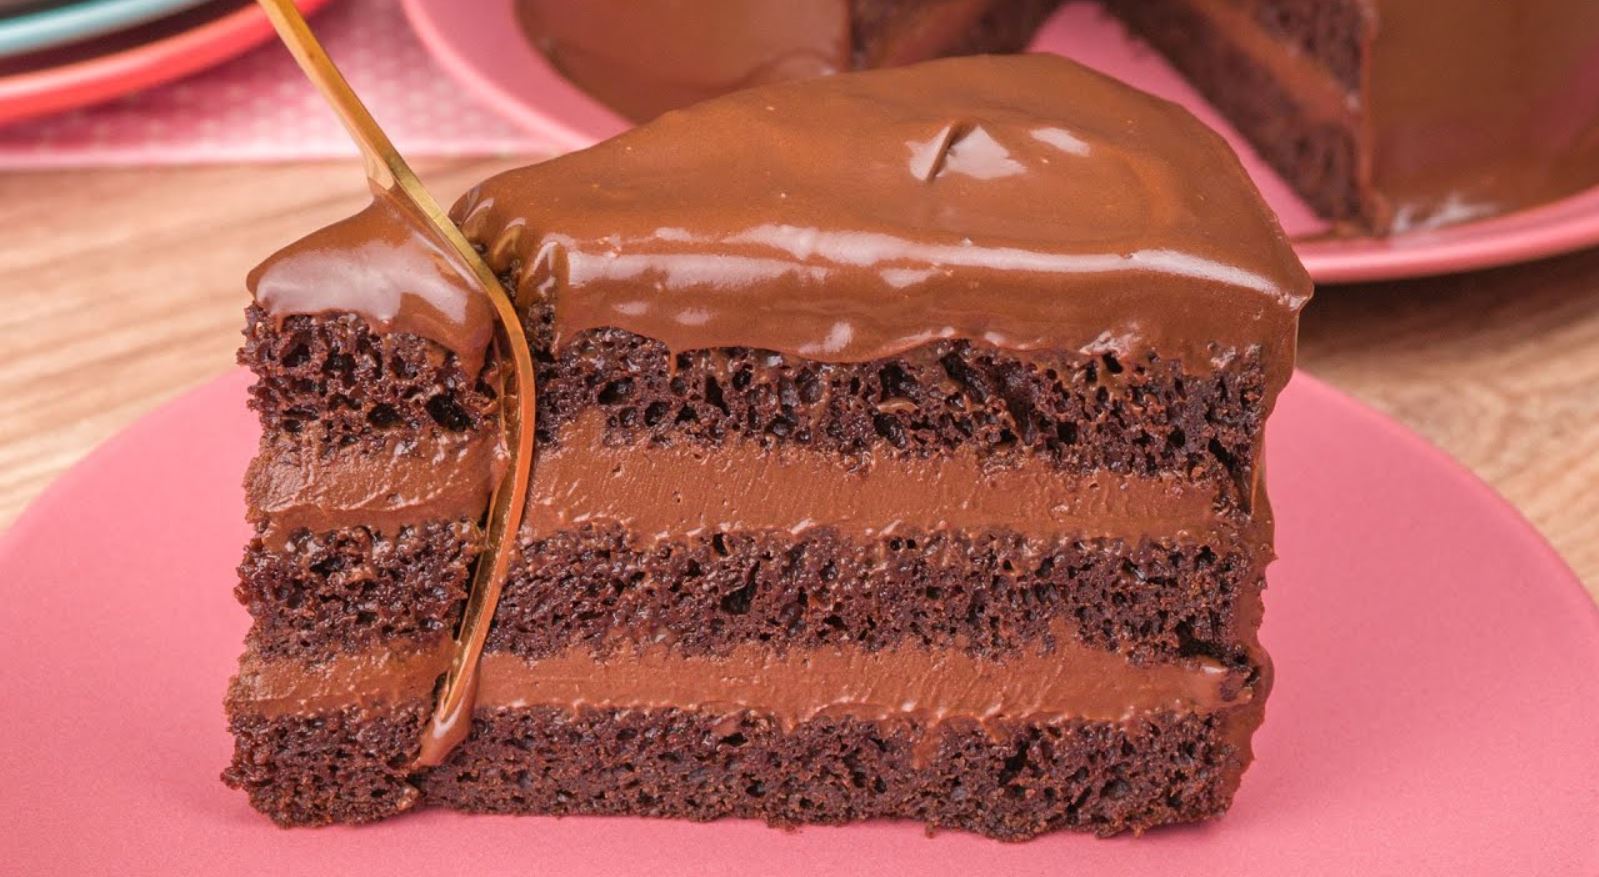 Decadent and Delicious Chocolate Cake